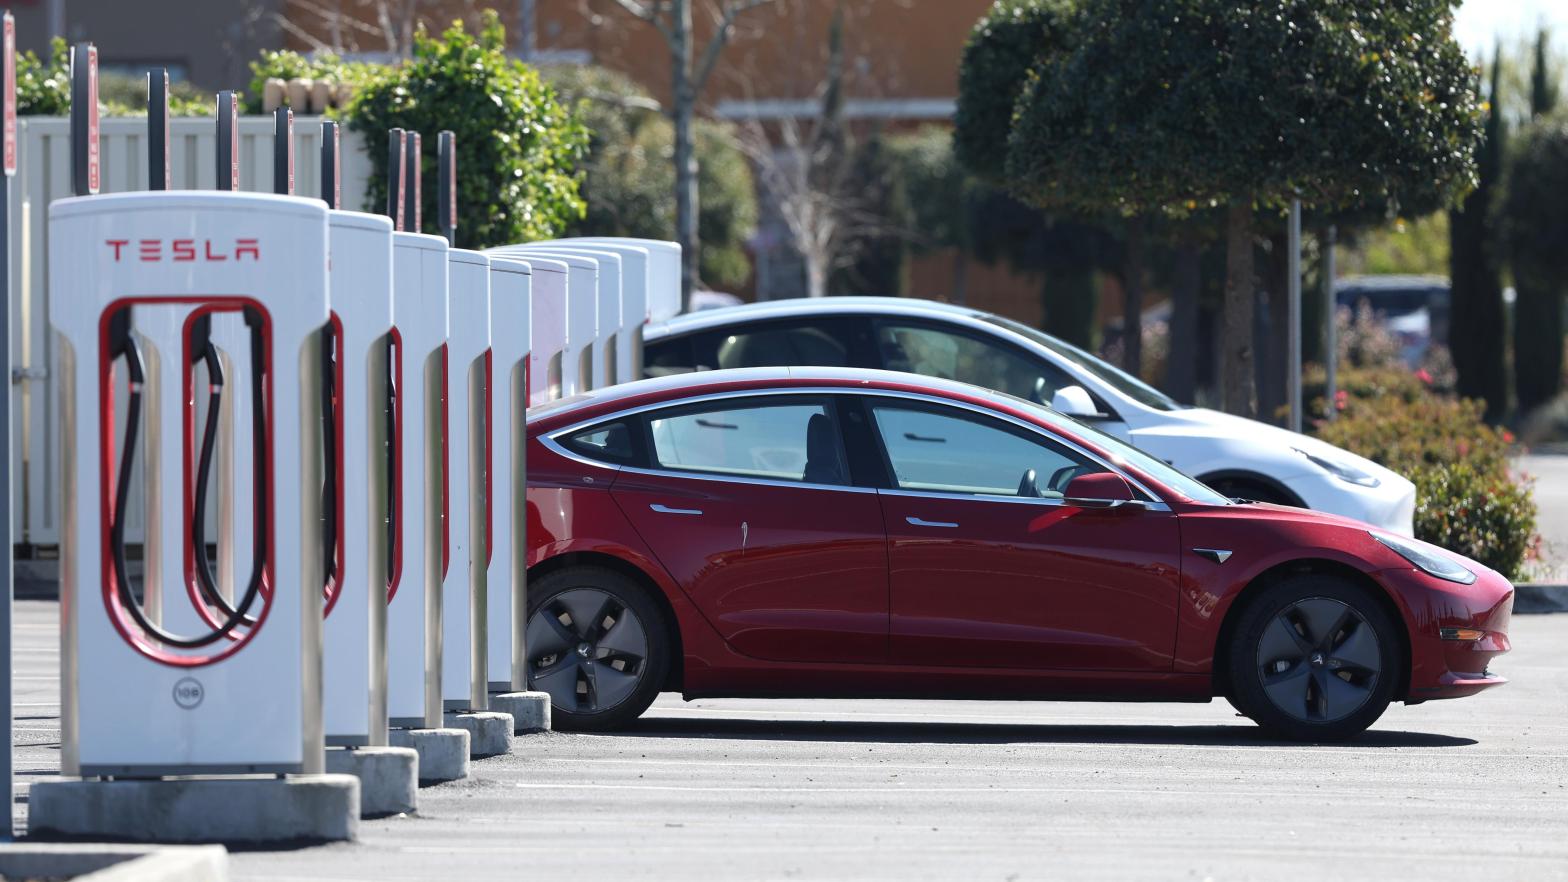 Tesla Vehicle Batteries Degrade Under 65% of Rated Range After Only Three Years